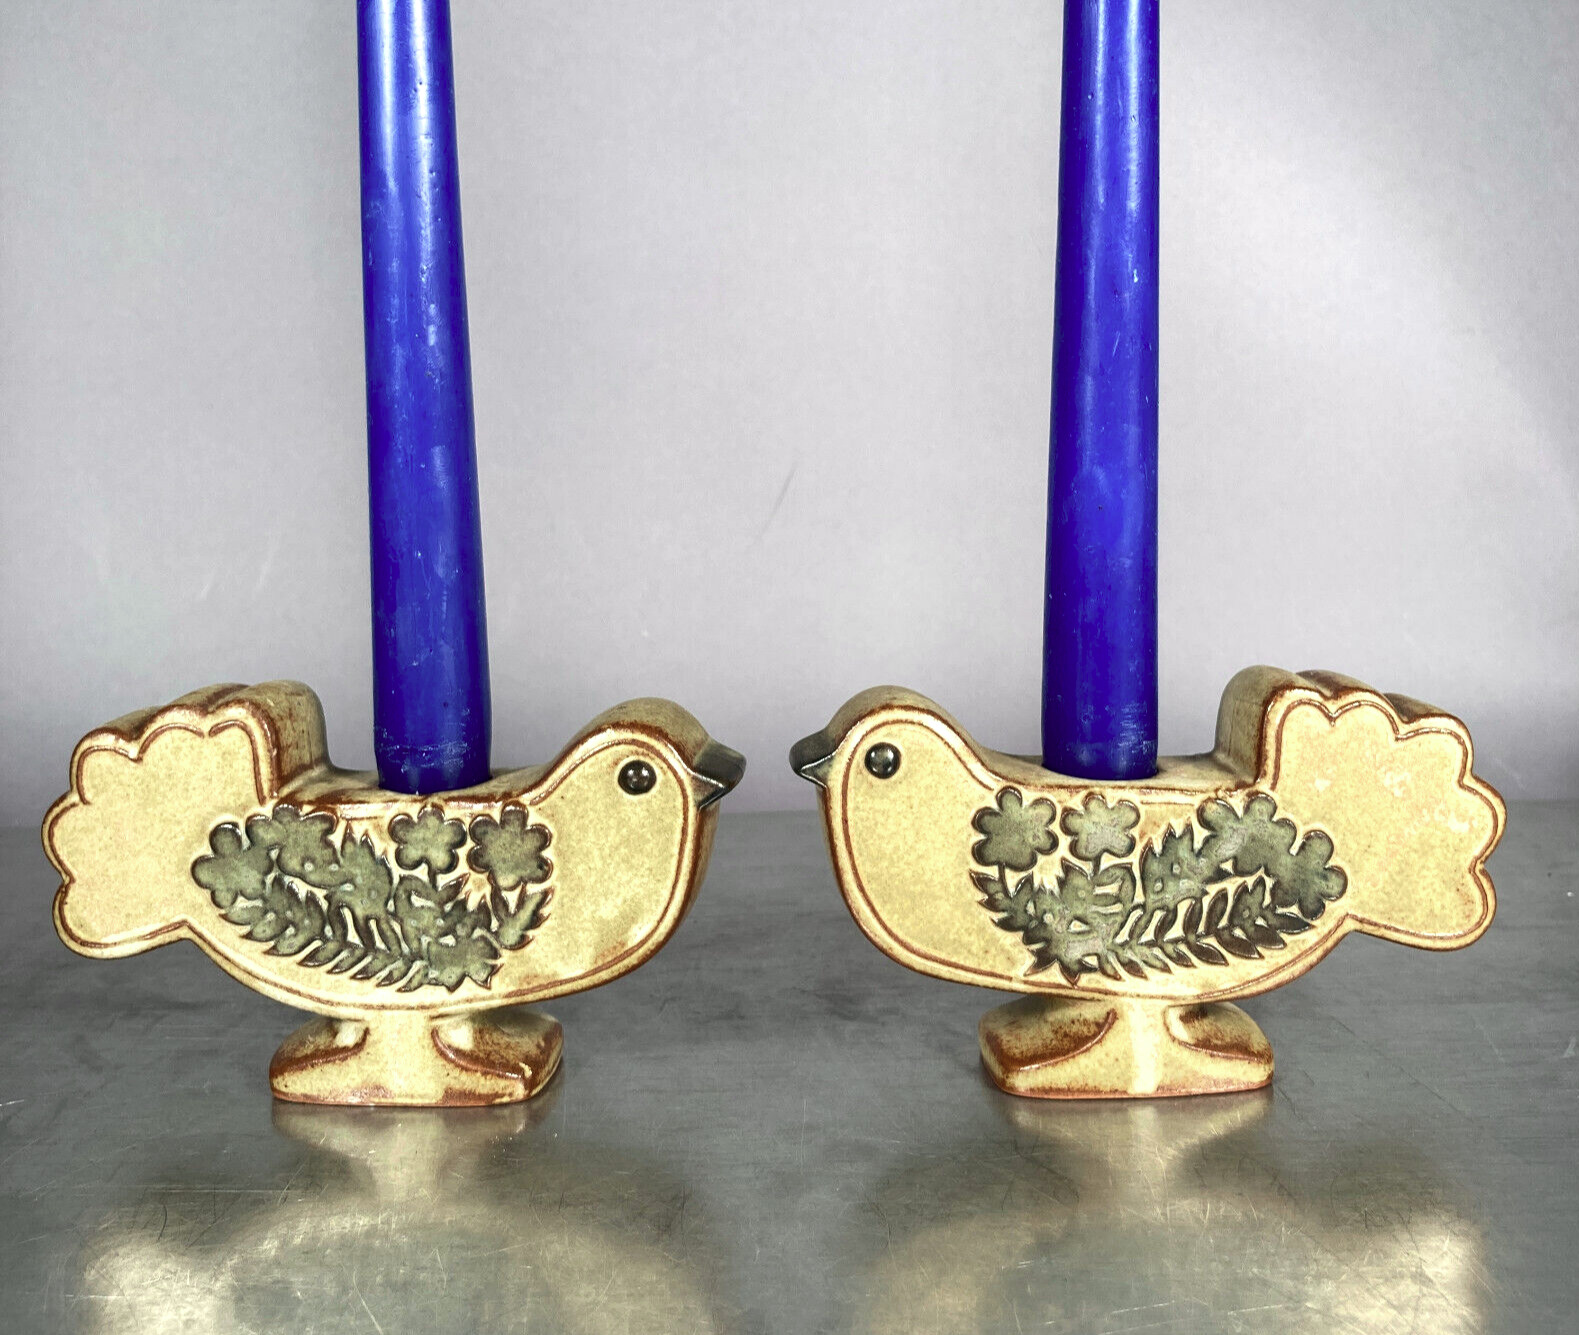 Set 2 Vintage Mid Century Modern Bird Pottery Candle Holders Candle Holders